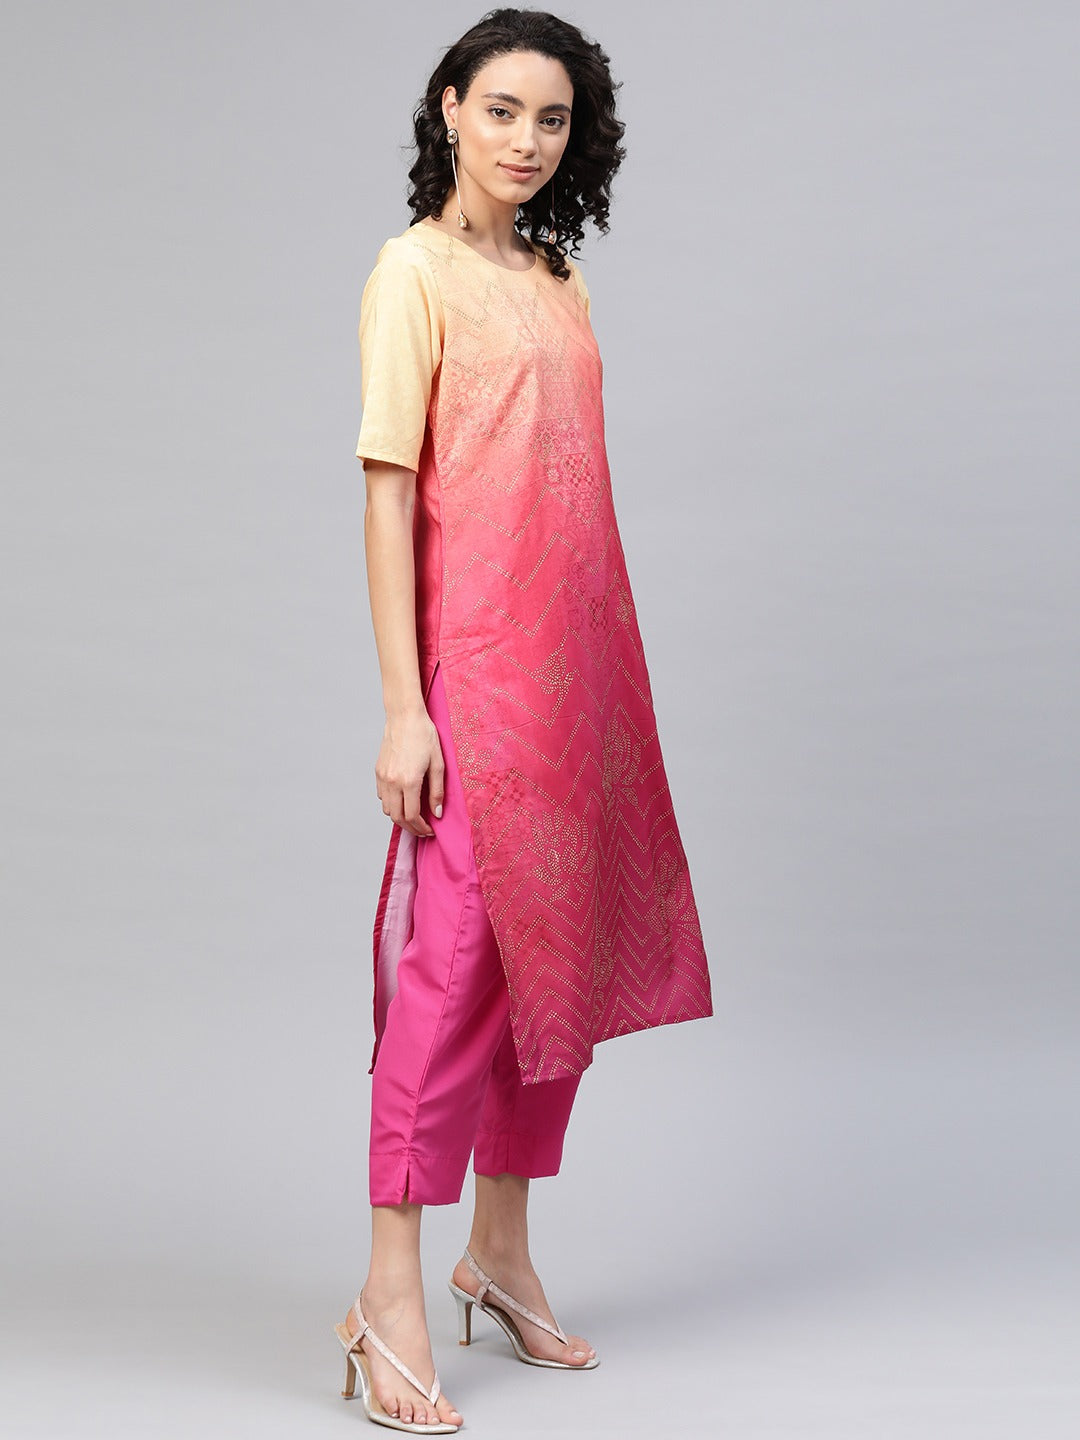 Pink & Golden Ombre Dyed Printed Kurta with Trousers